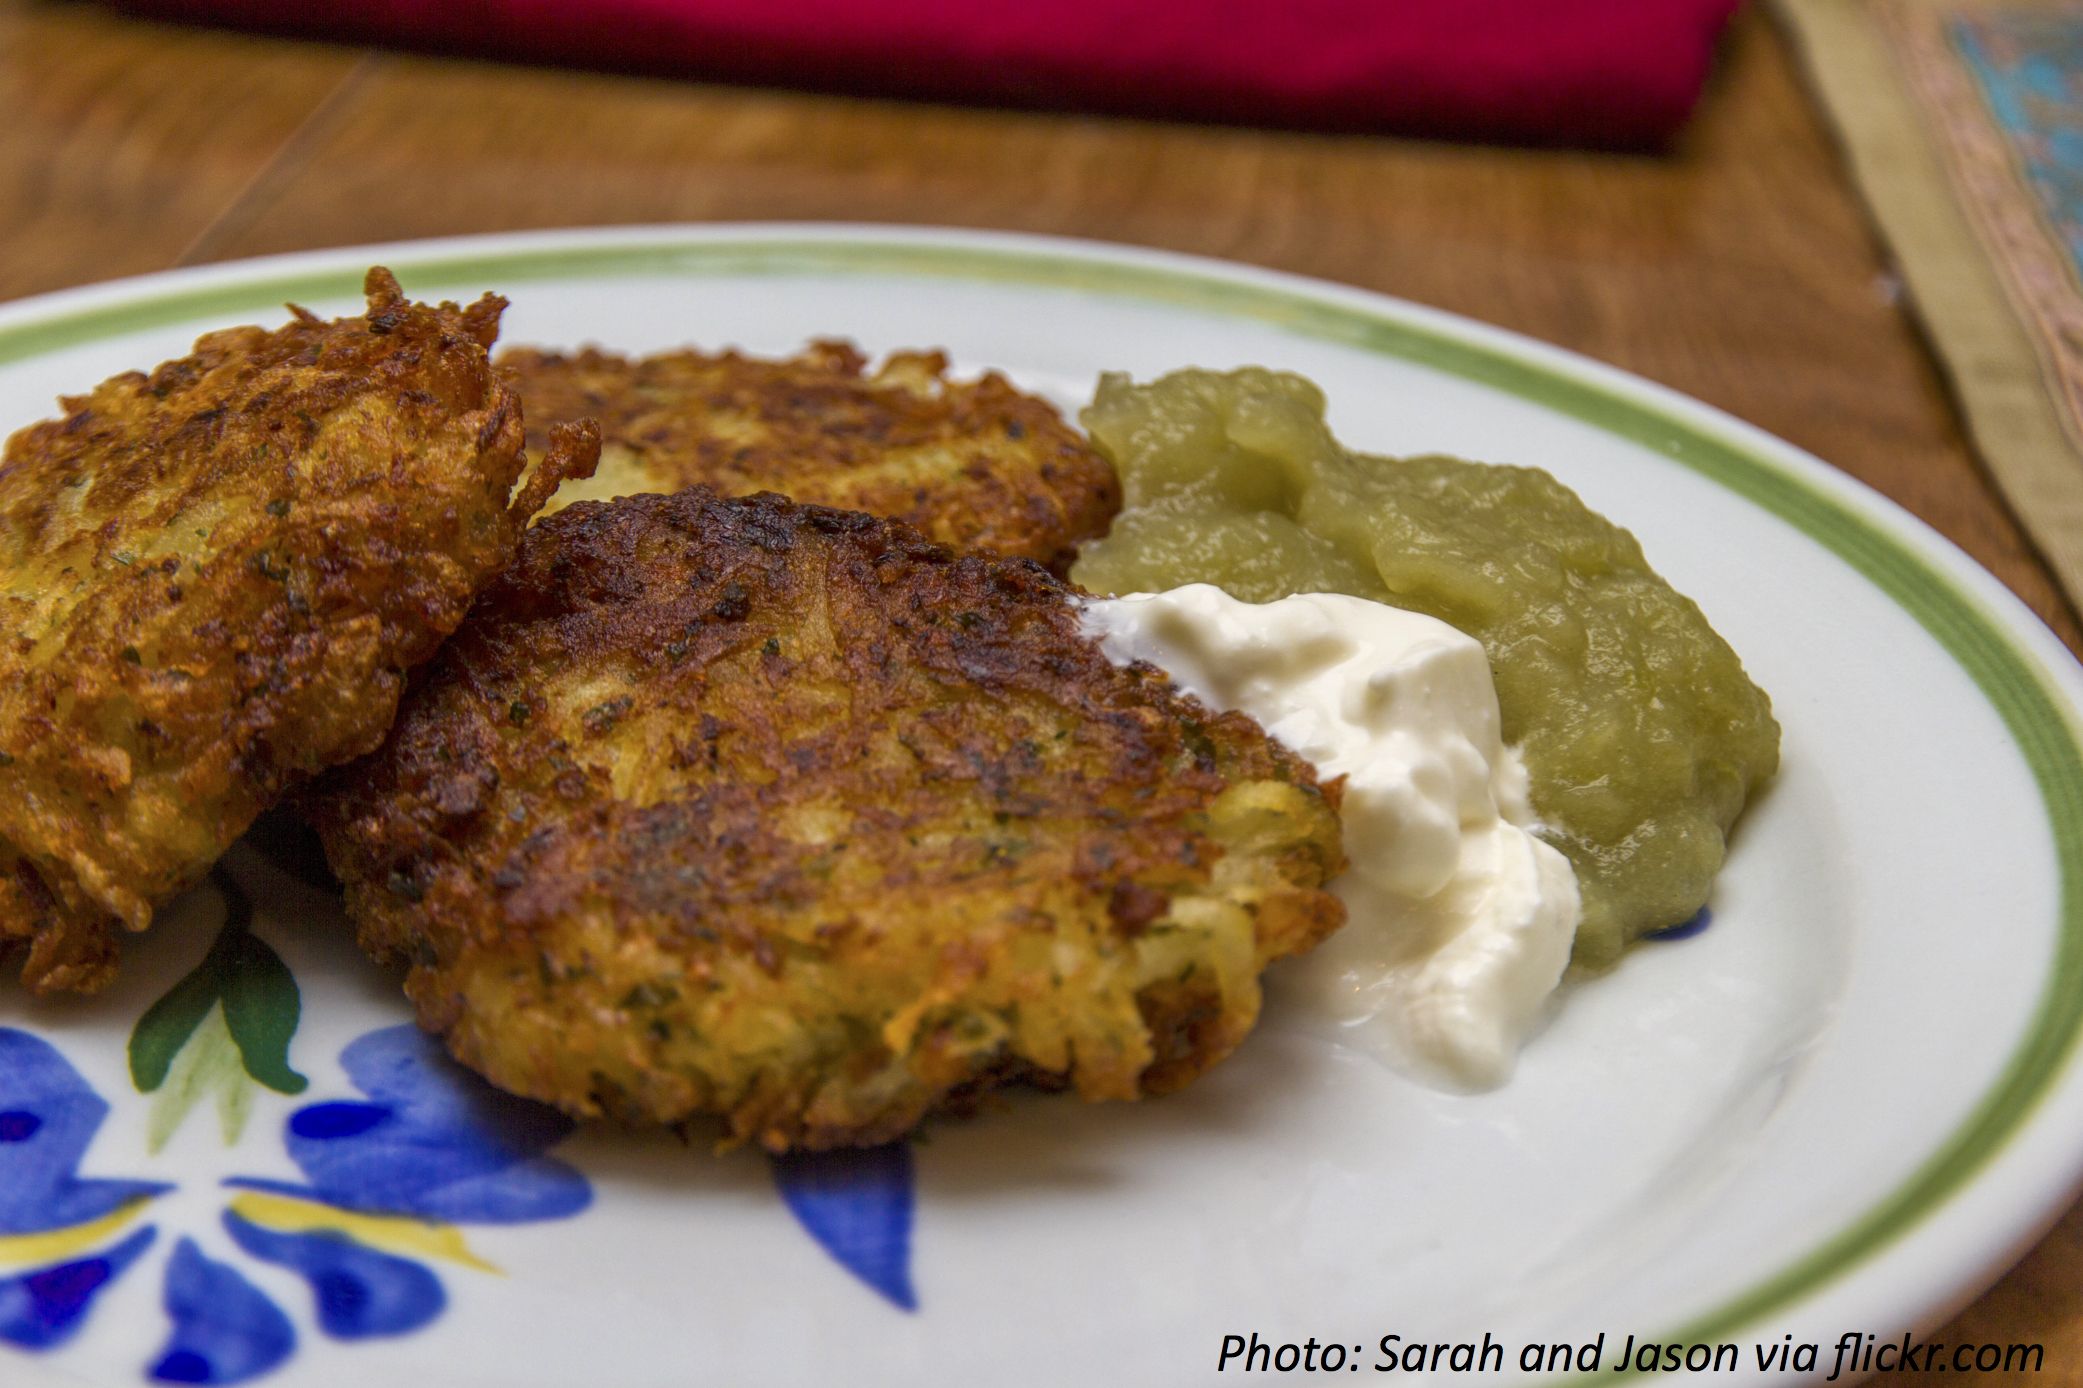 Lots of Love and Latkes